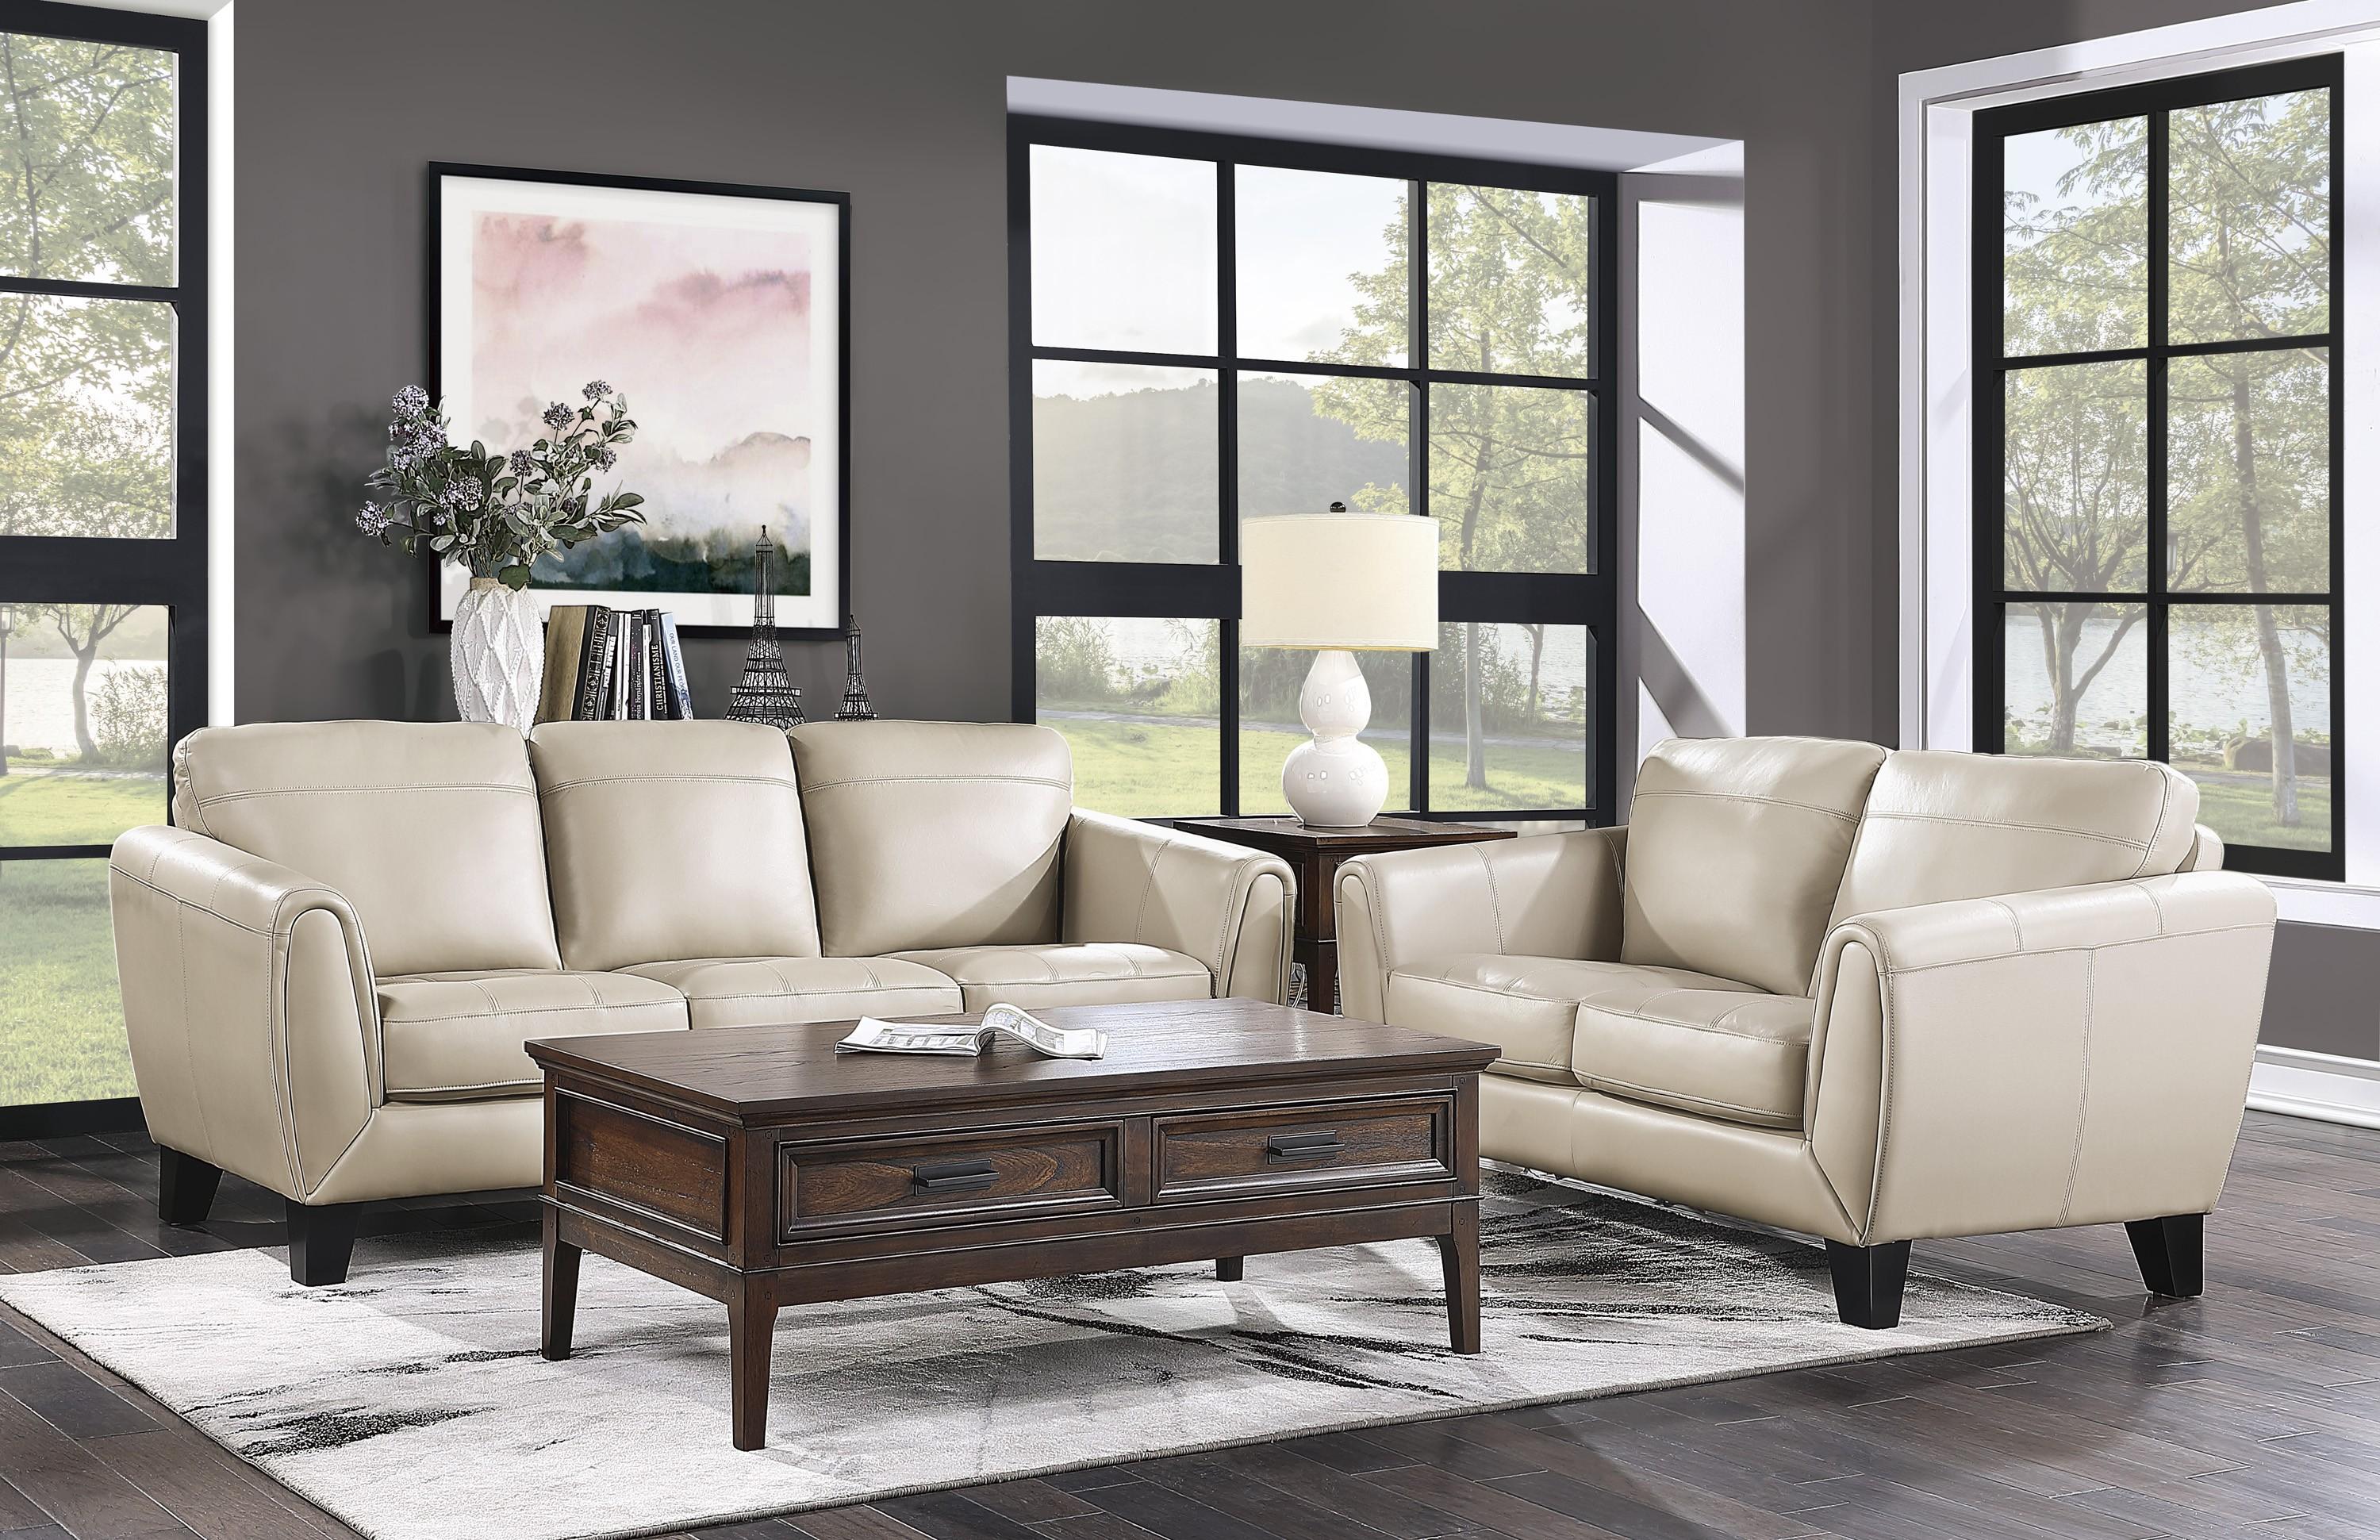 Modern Living Room Set 9460BE-2PC Spivey 9460BE-2PC in Beige Leather